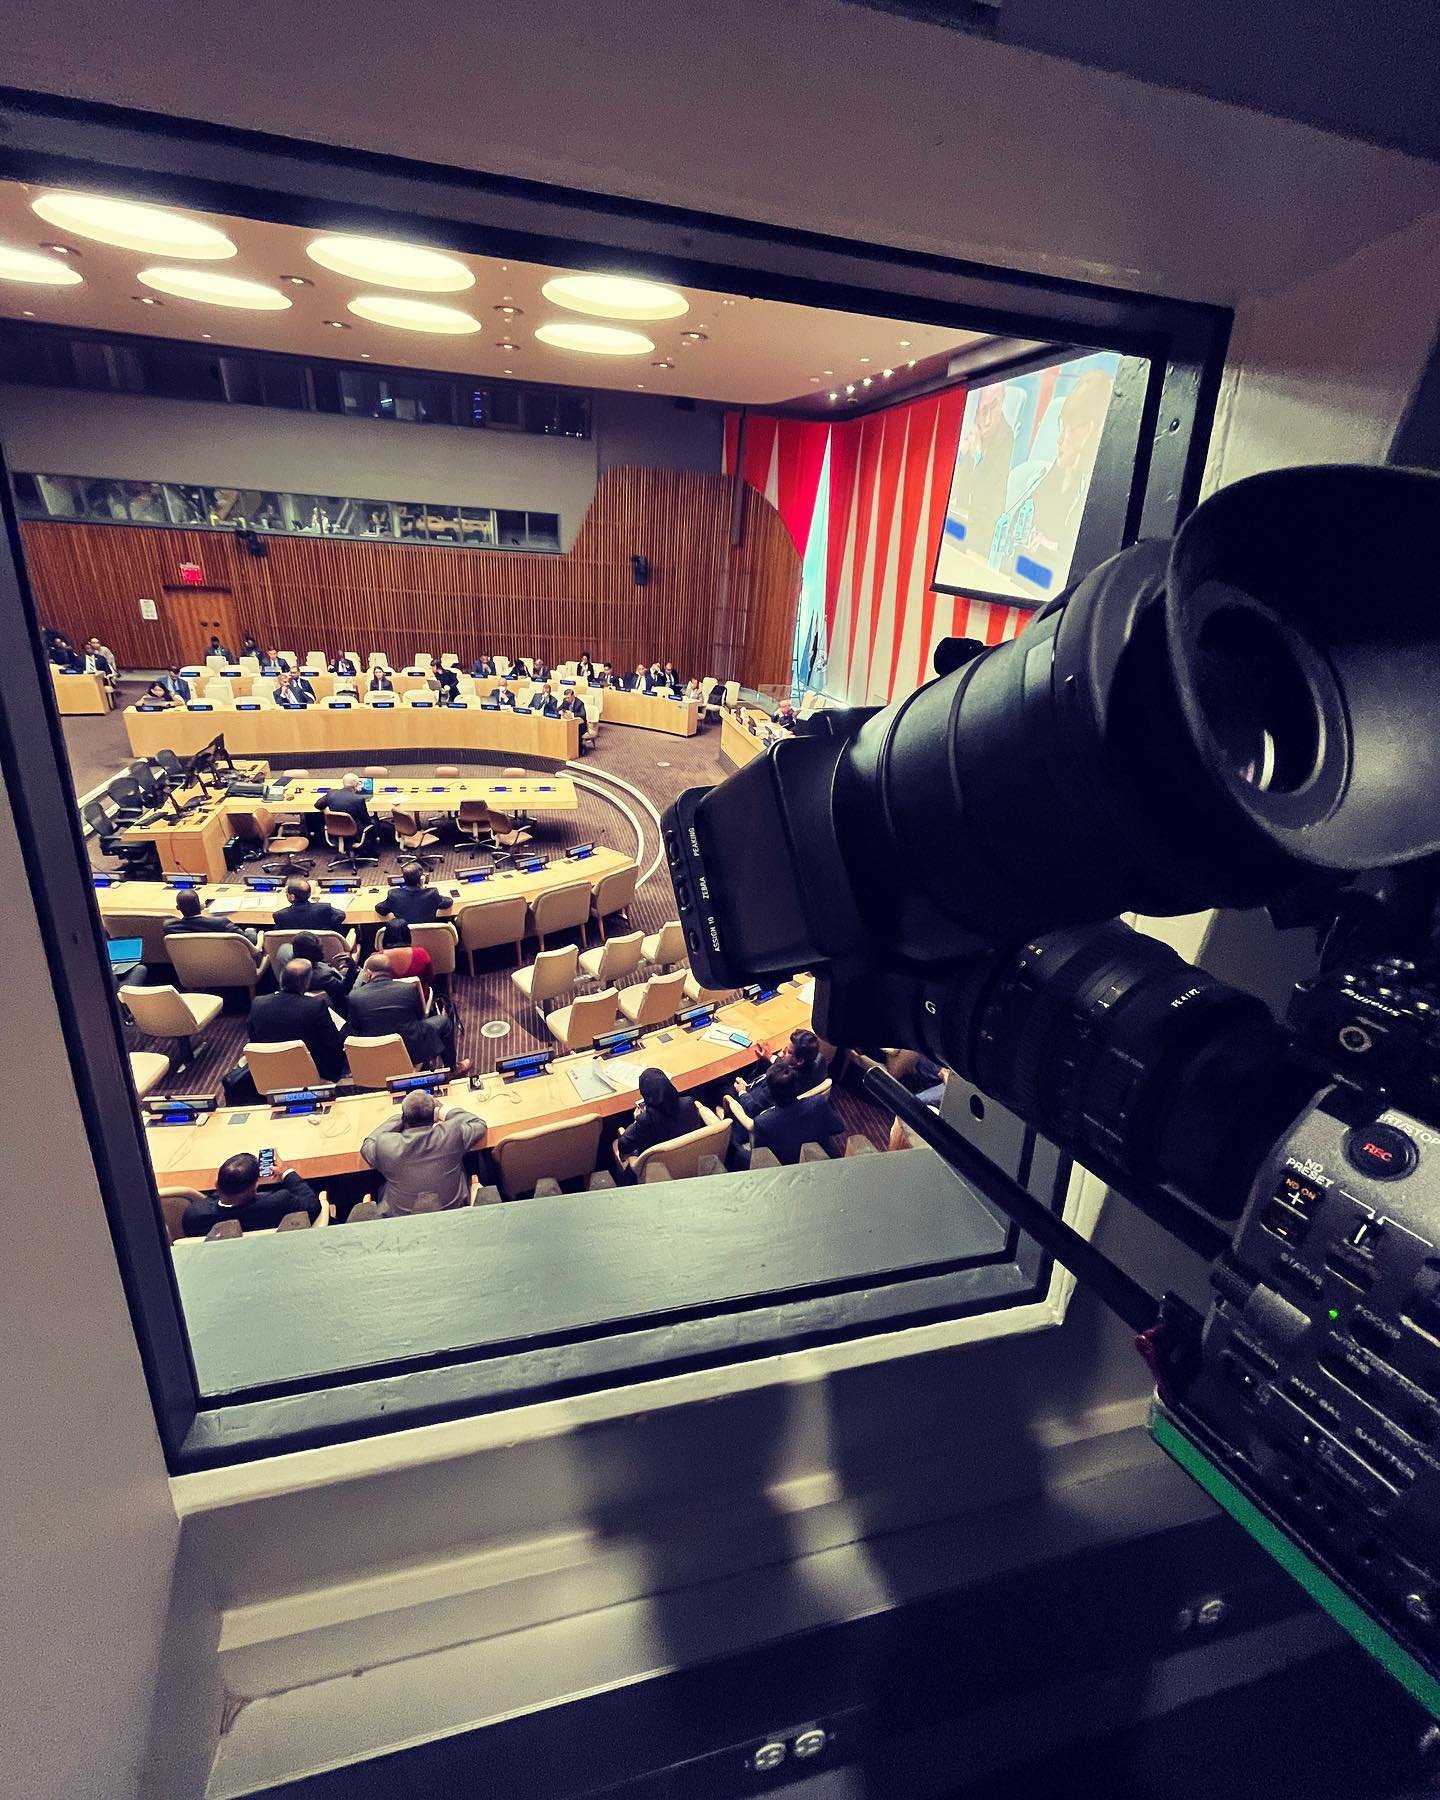 Wrapping up my final day of filming at the UN for the week. Always fun being in NYC.